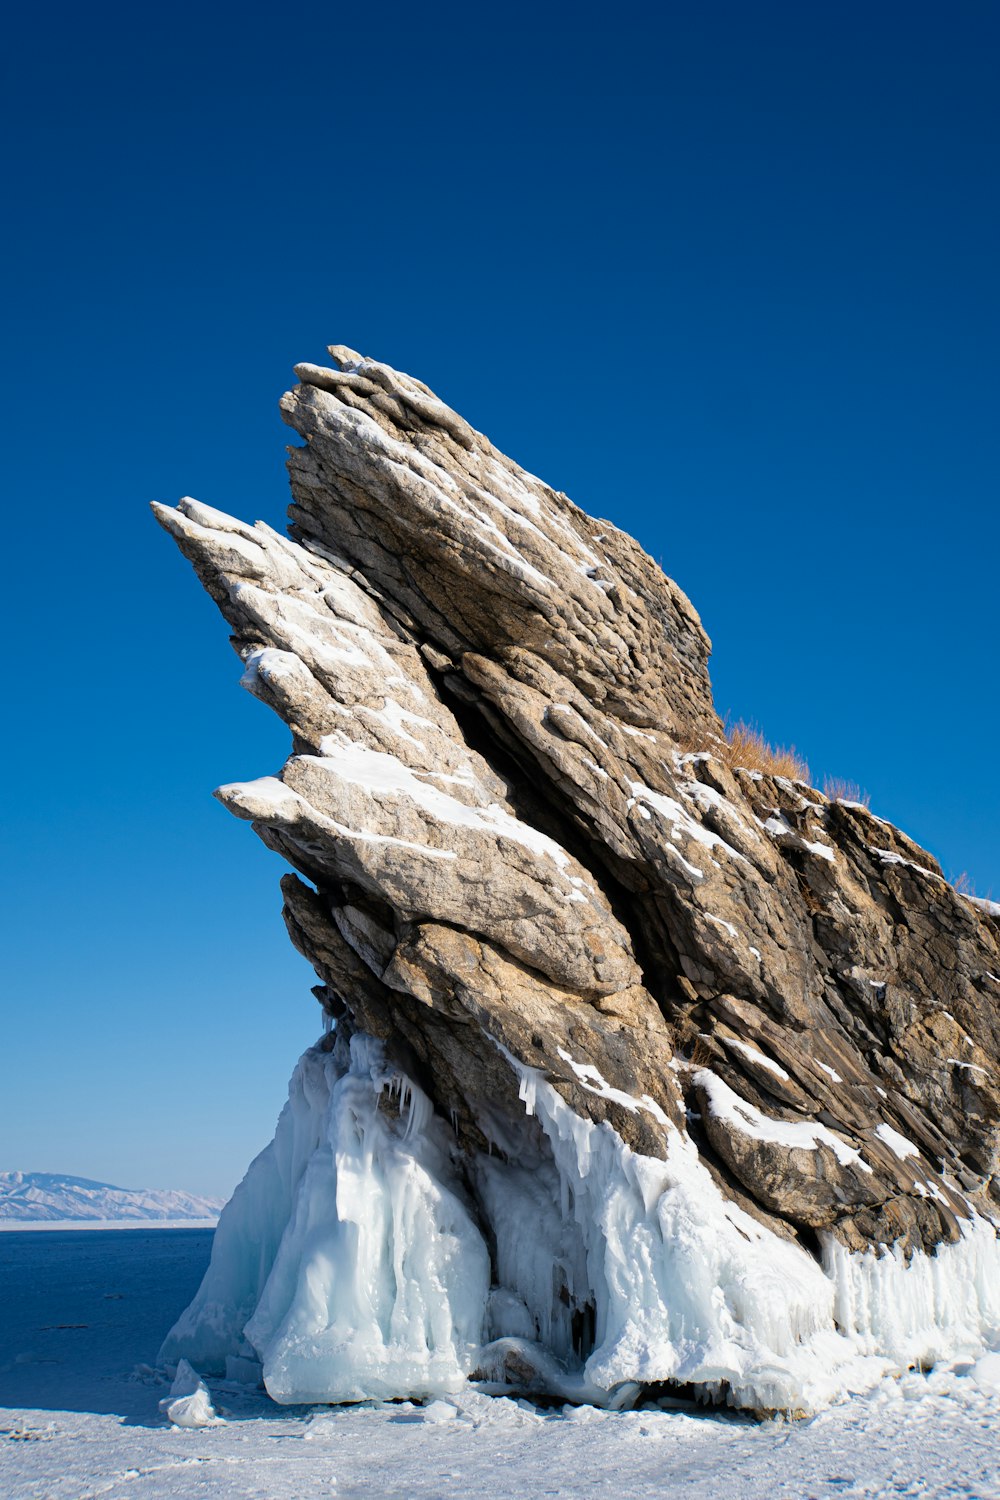 a large rock formation made of ice and snow